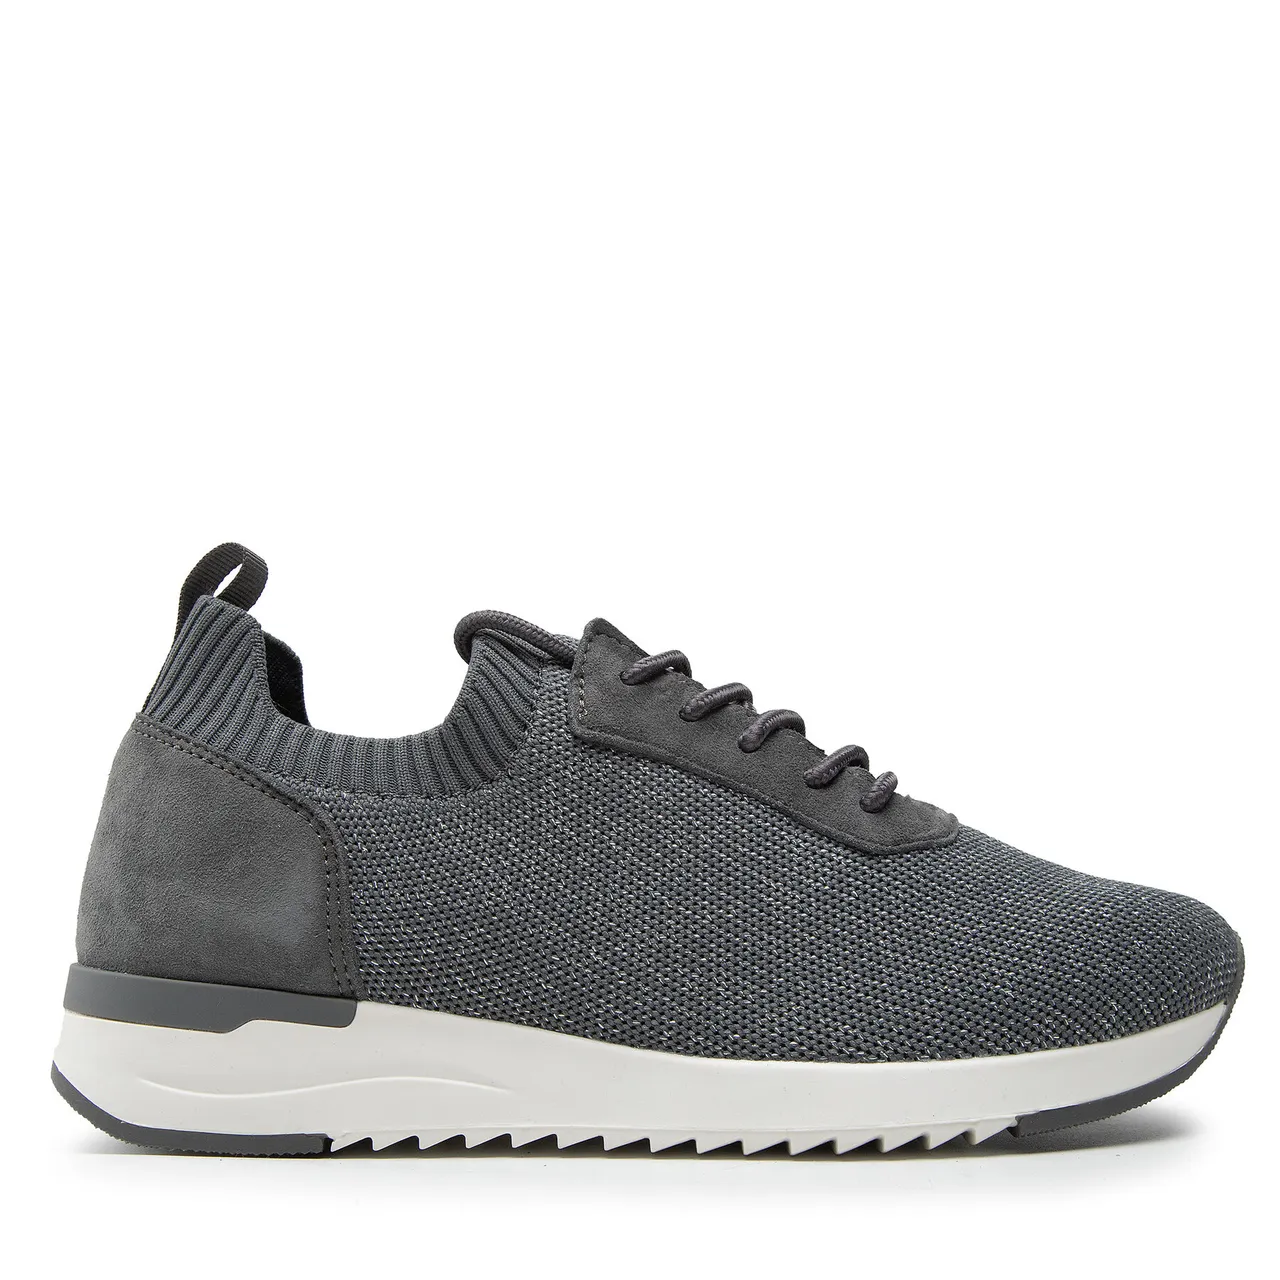 Sneakers Caprice 9-23701-29 Grey Knit 204